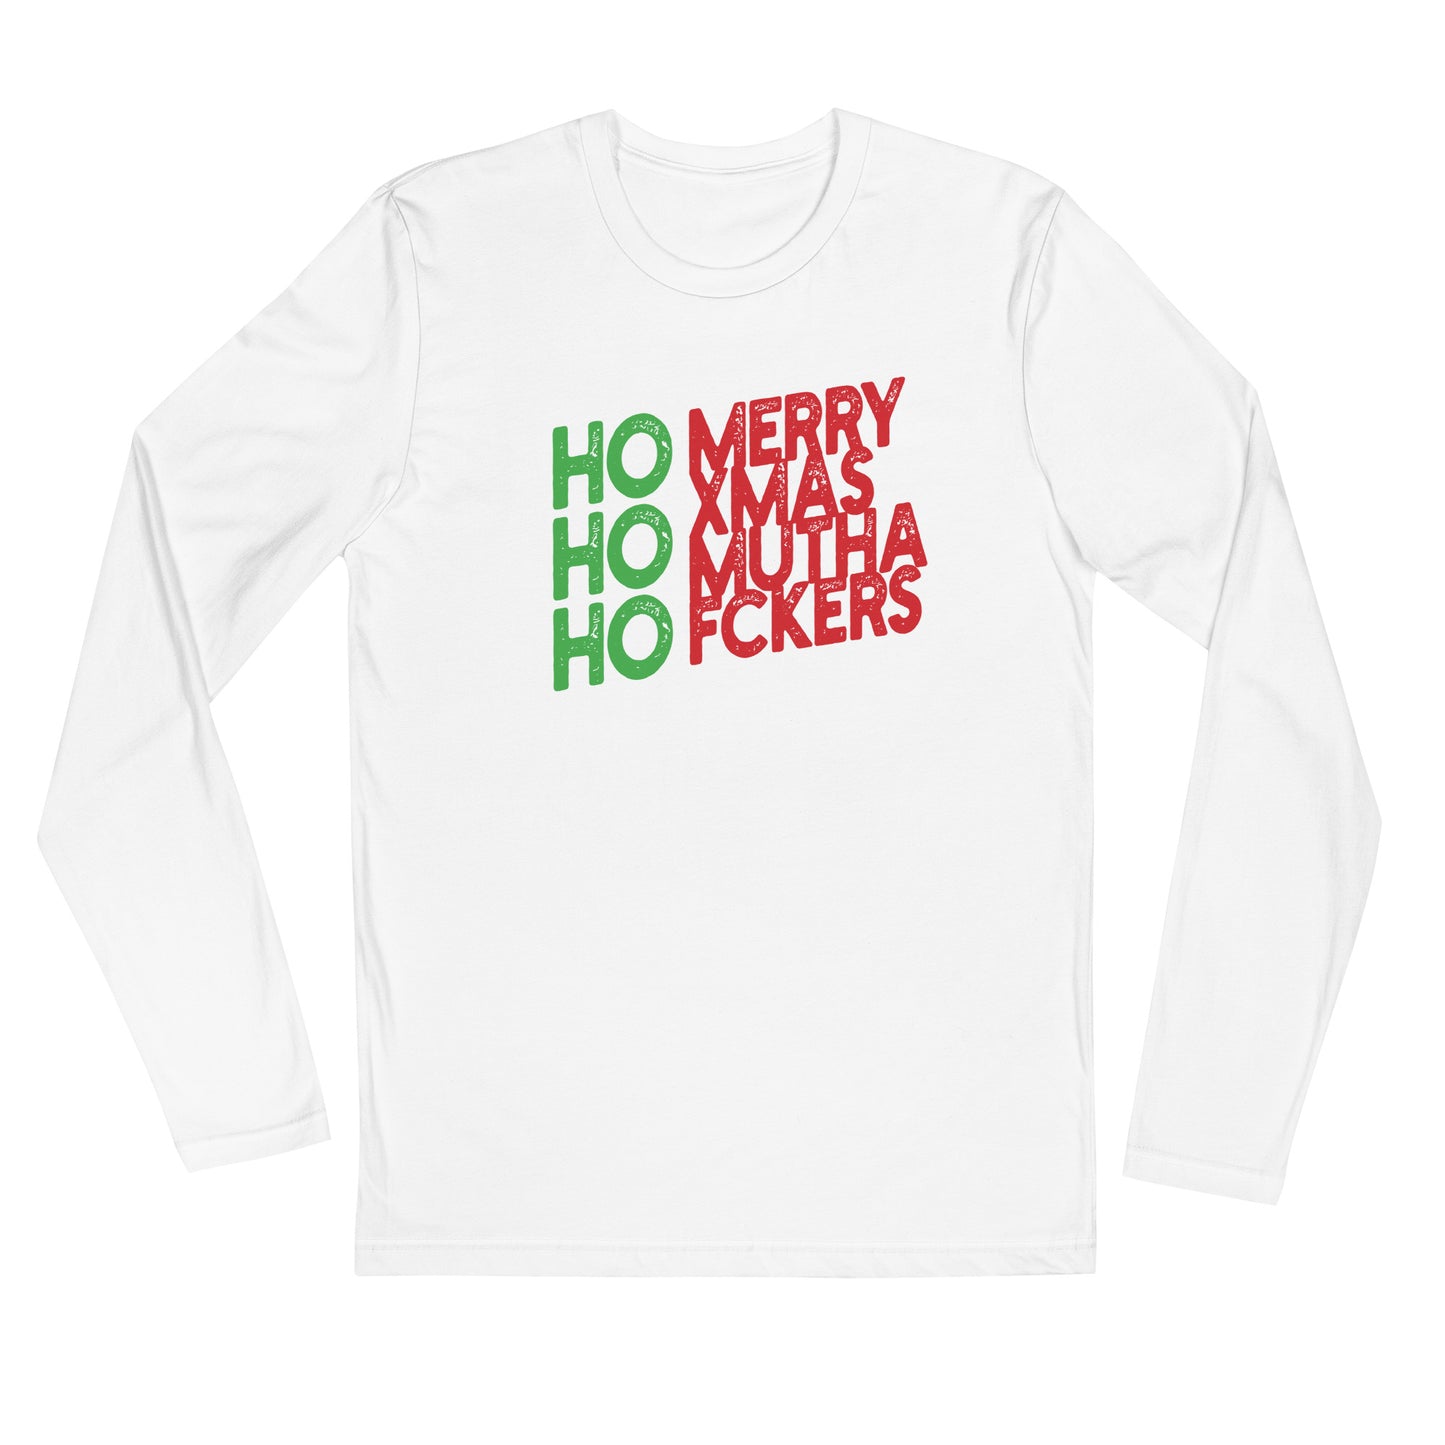 MERRY XMAS MUTH F*CKERS-Long Sleeve Fitted Crew